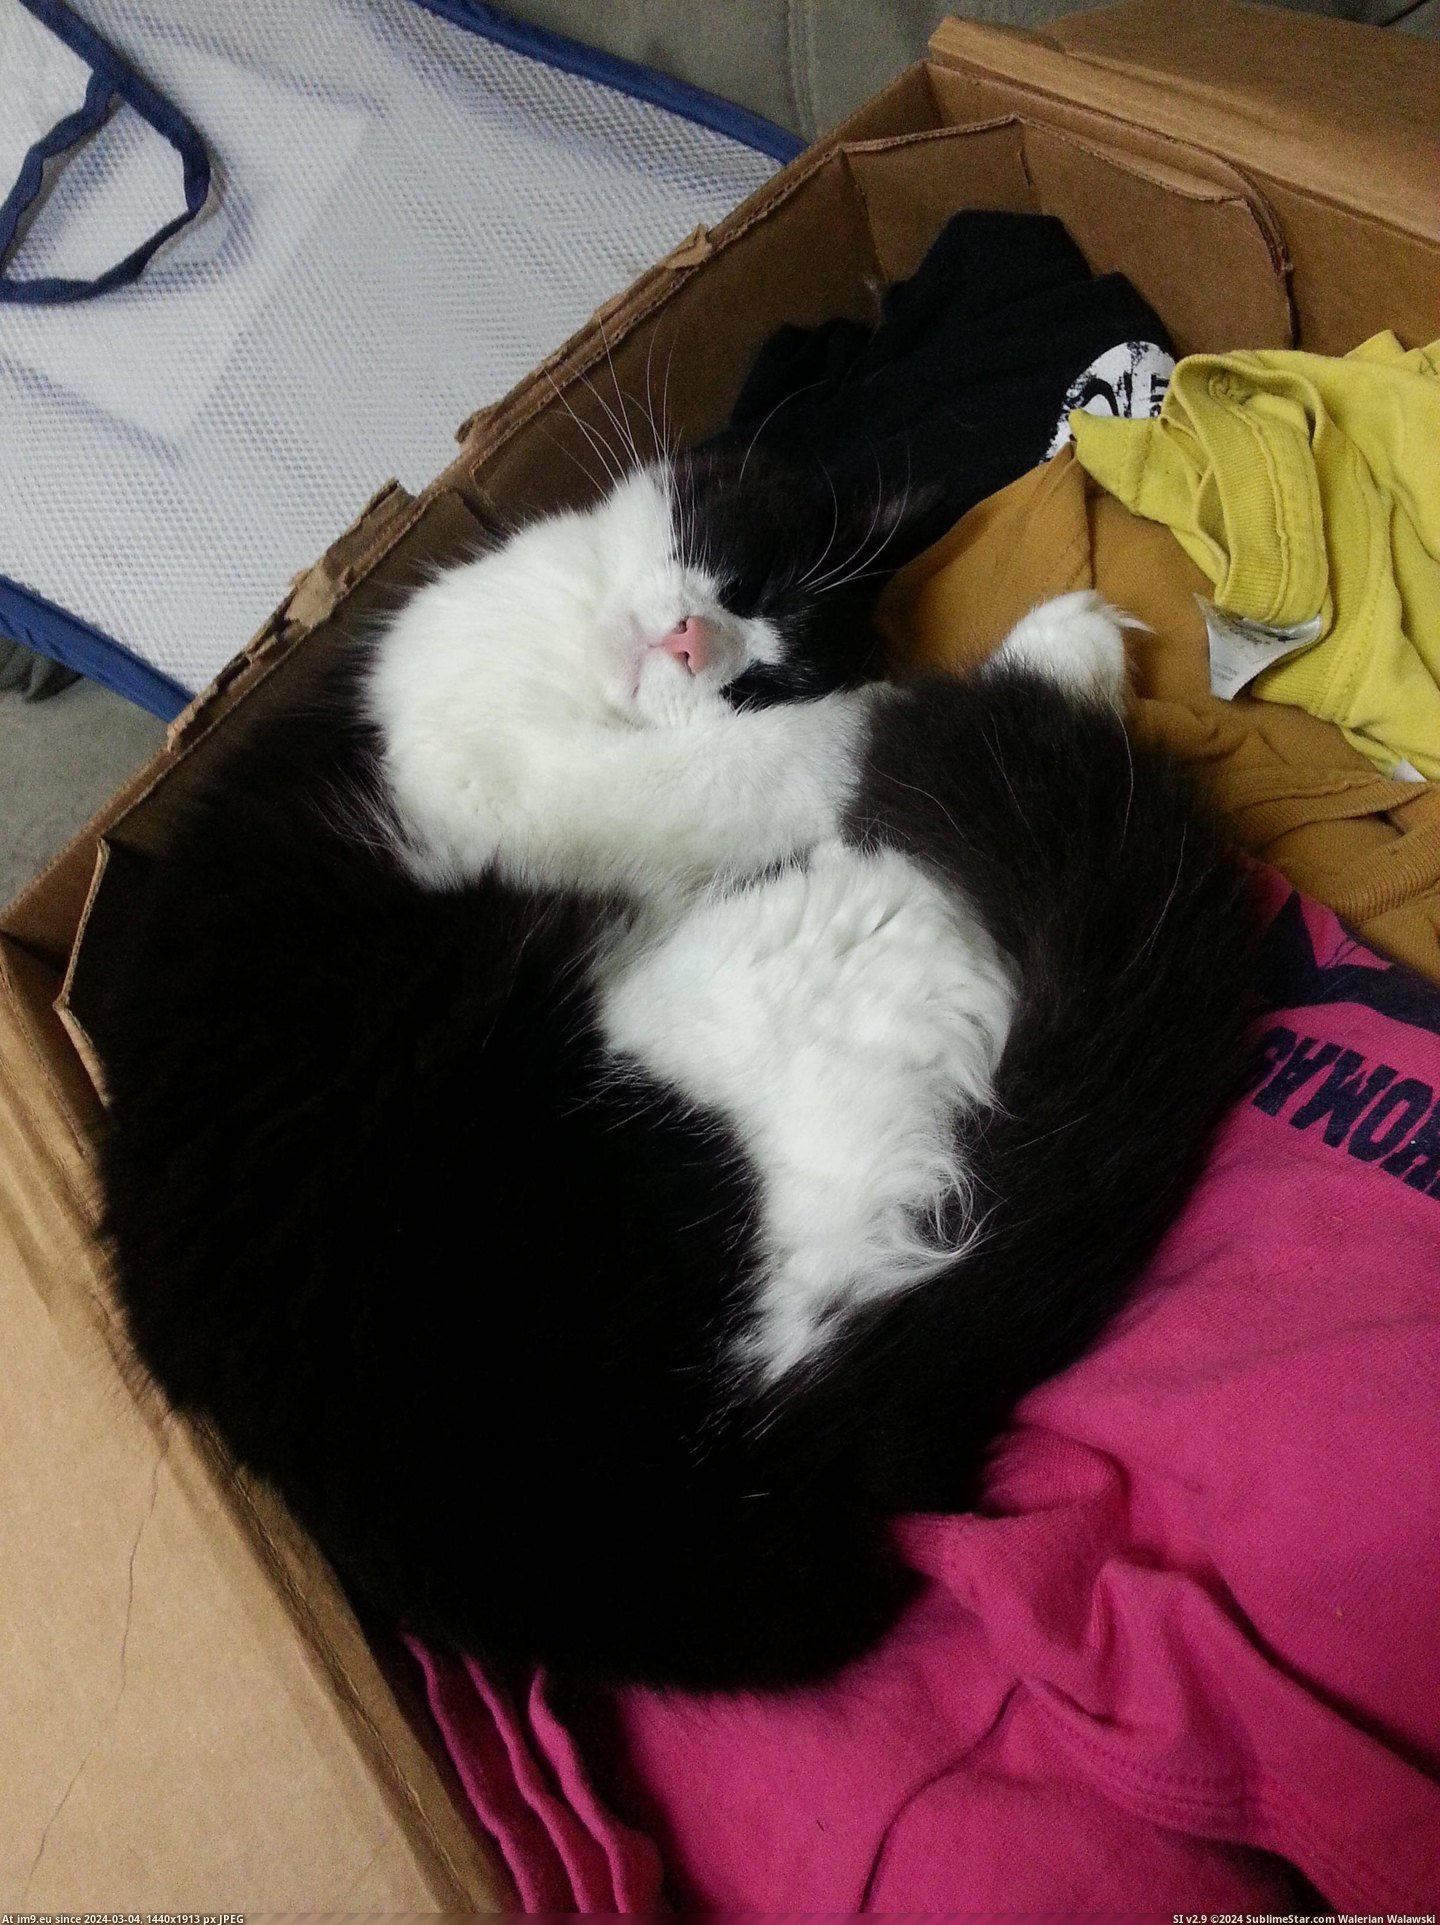 #Cats #House #Left #Sybil #Unattended #Boxes #Joy #Packing [Cats] We are currently packing up our house and left a few boxes unattended. Much to Sybil's joy. Pic. (Image of album My r/CATS favs))